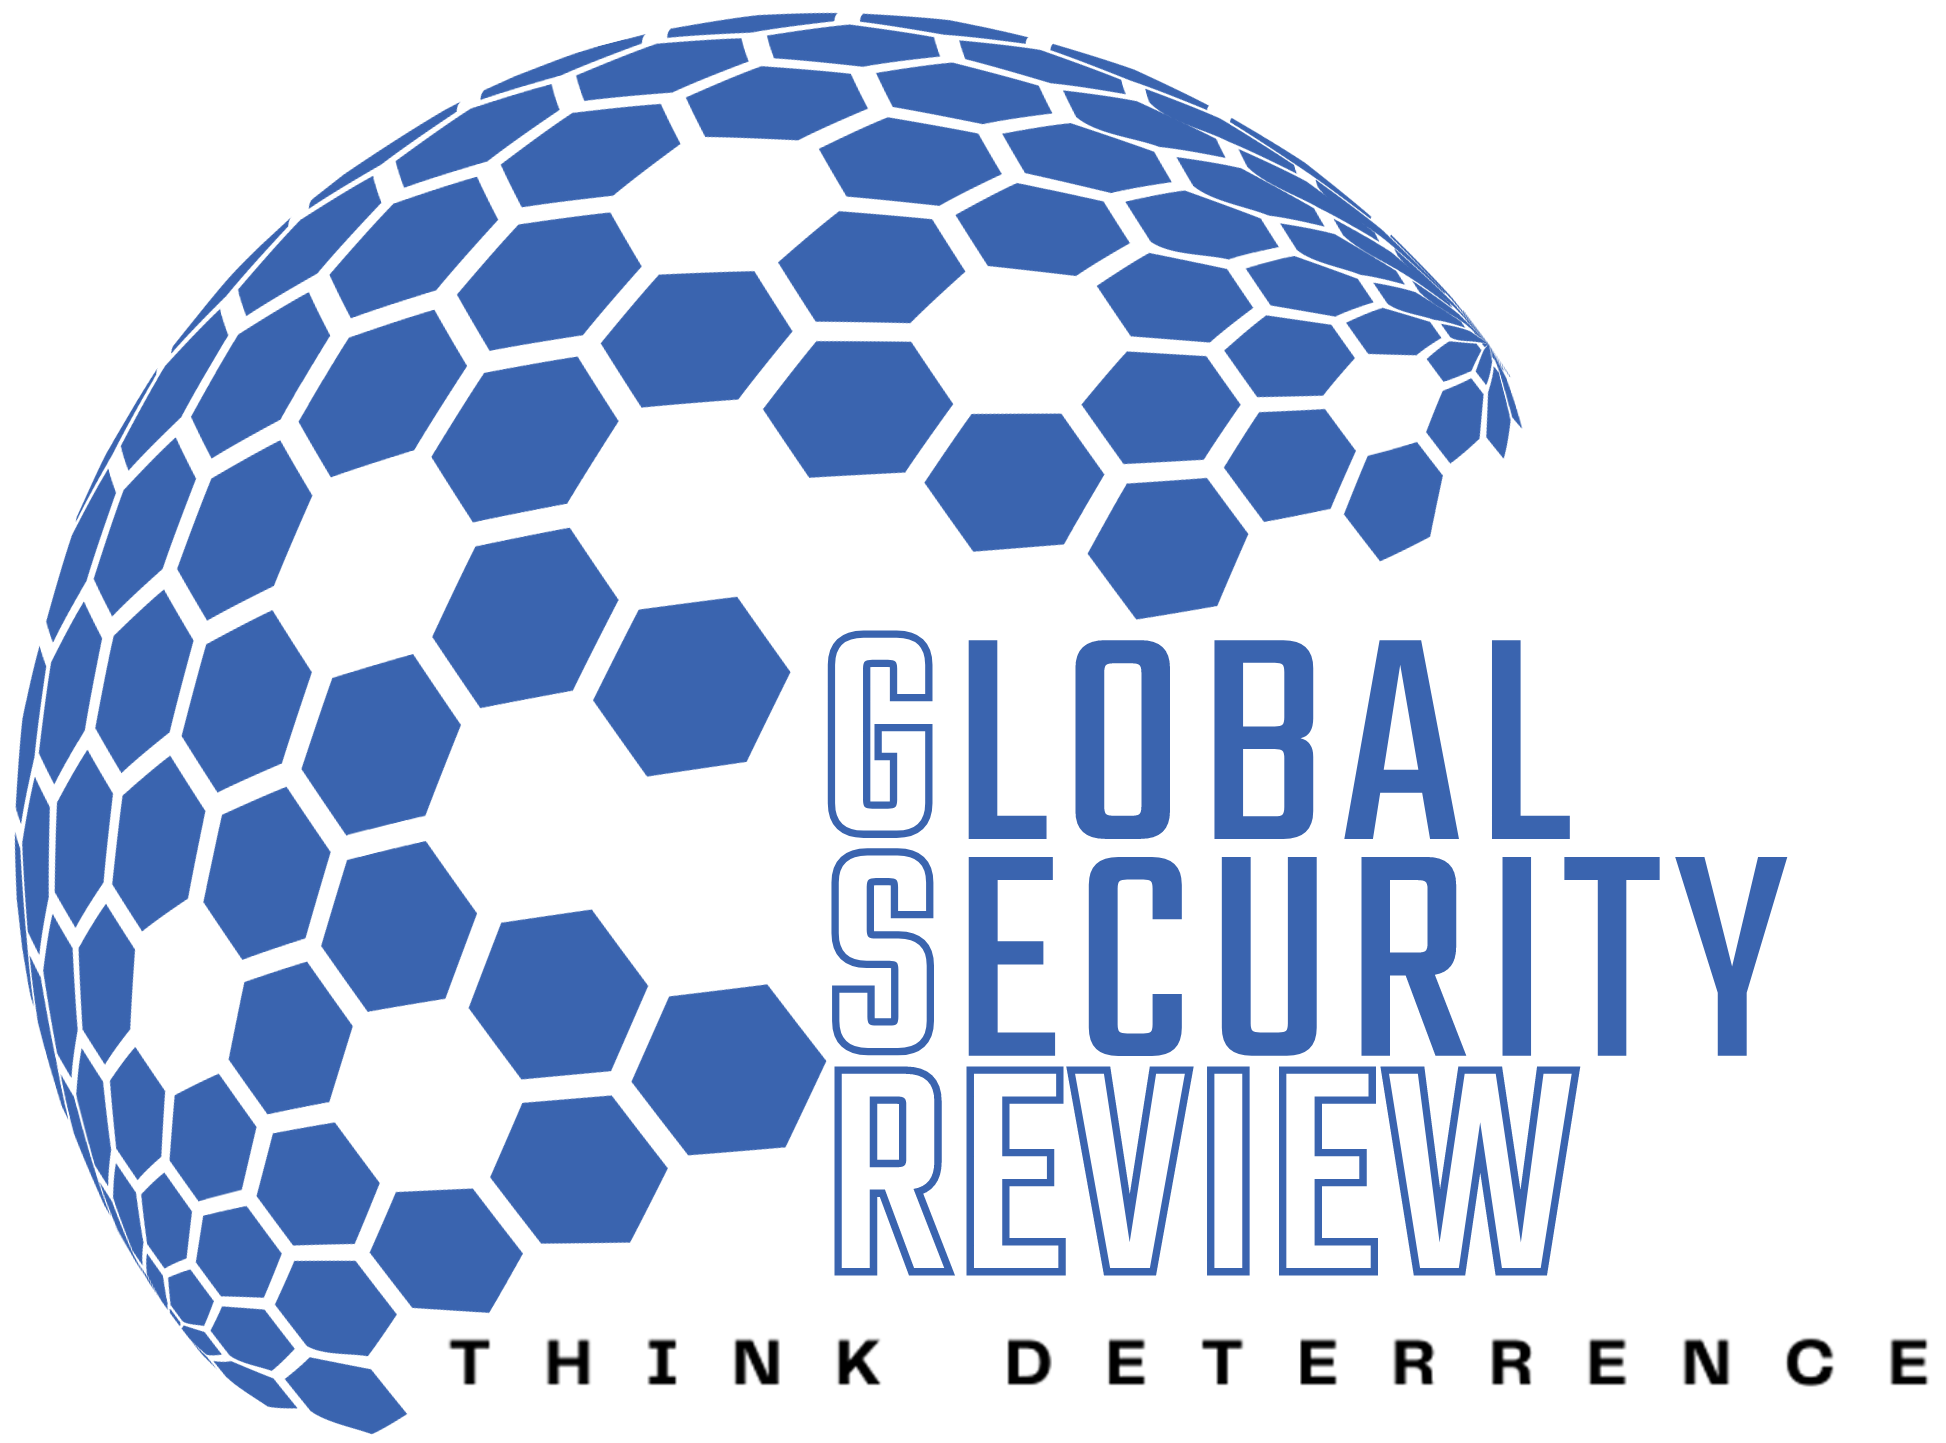 Global Security Review